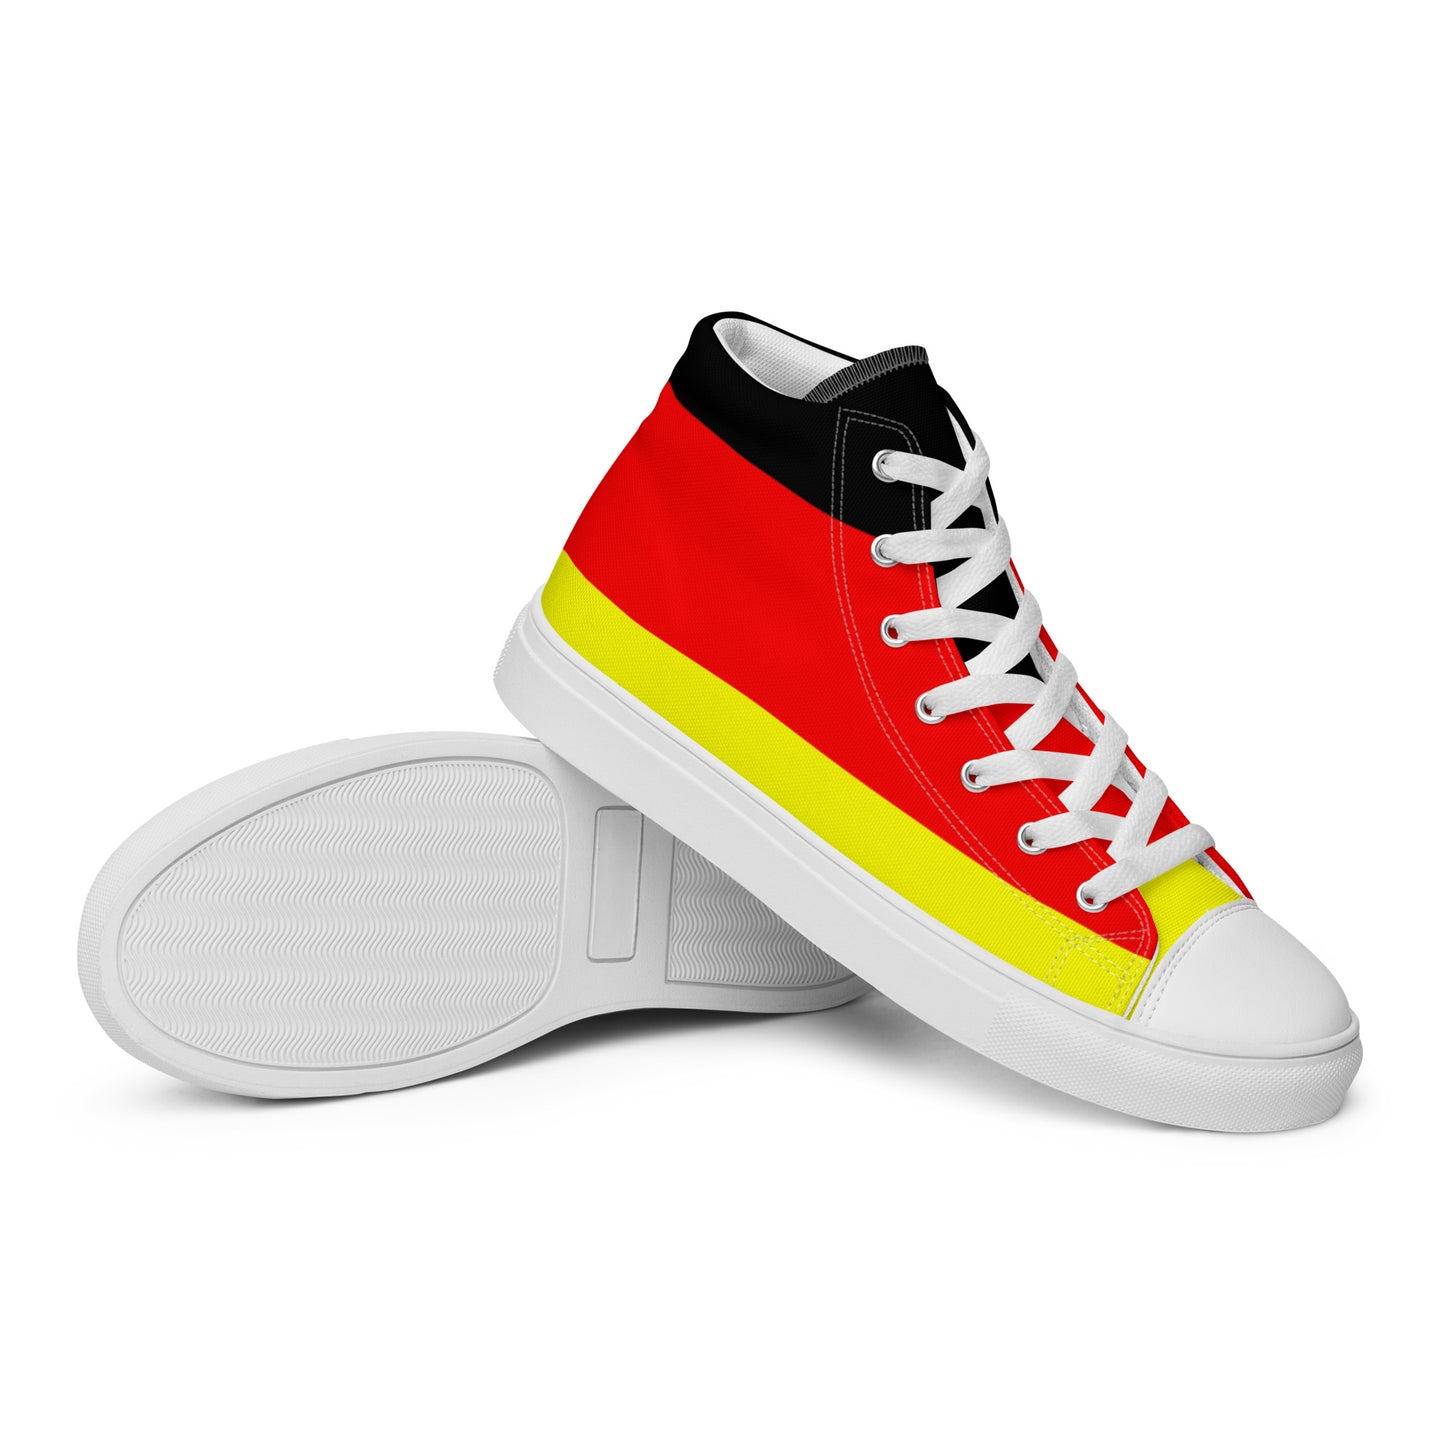 Germany Flag - Sustainably Made Women’s high top canvas shoes